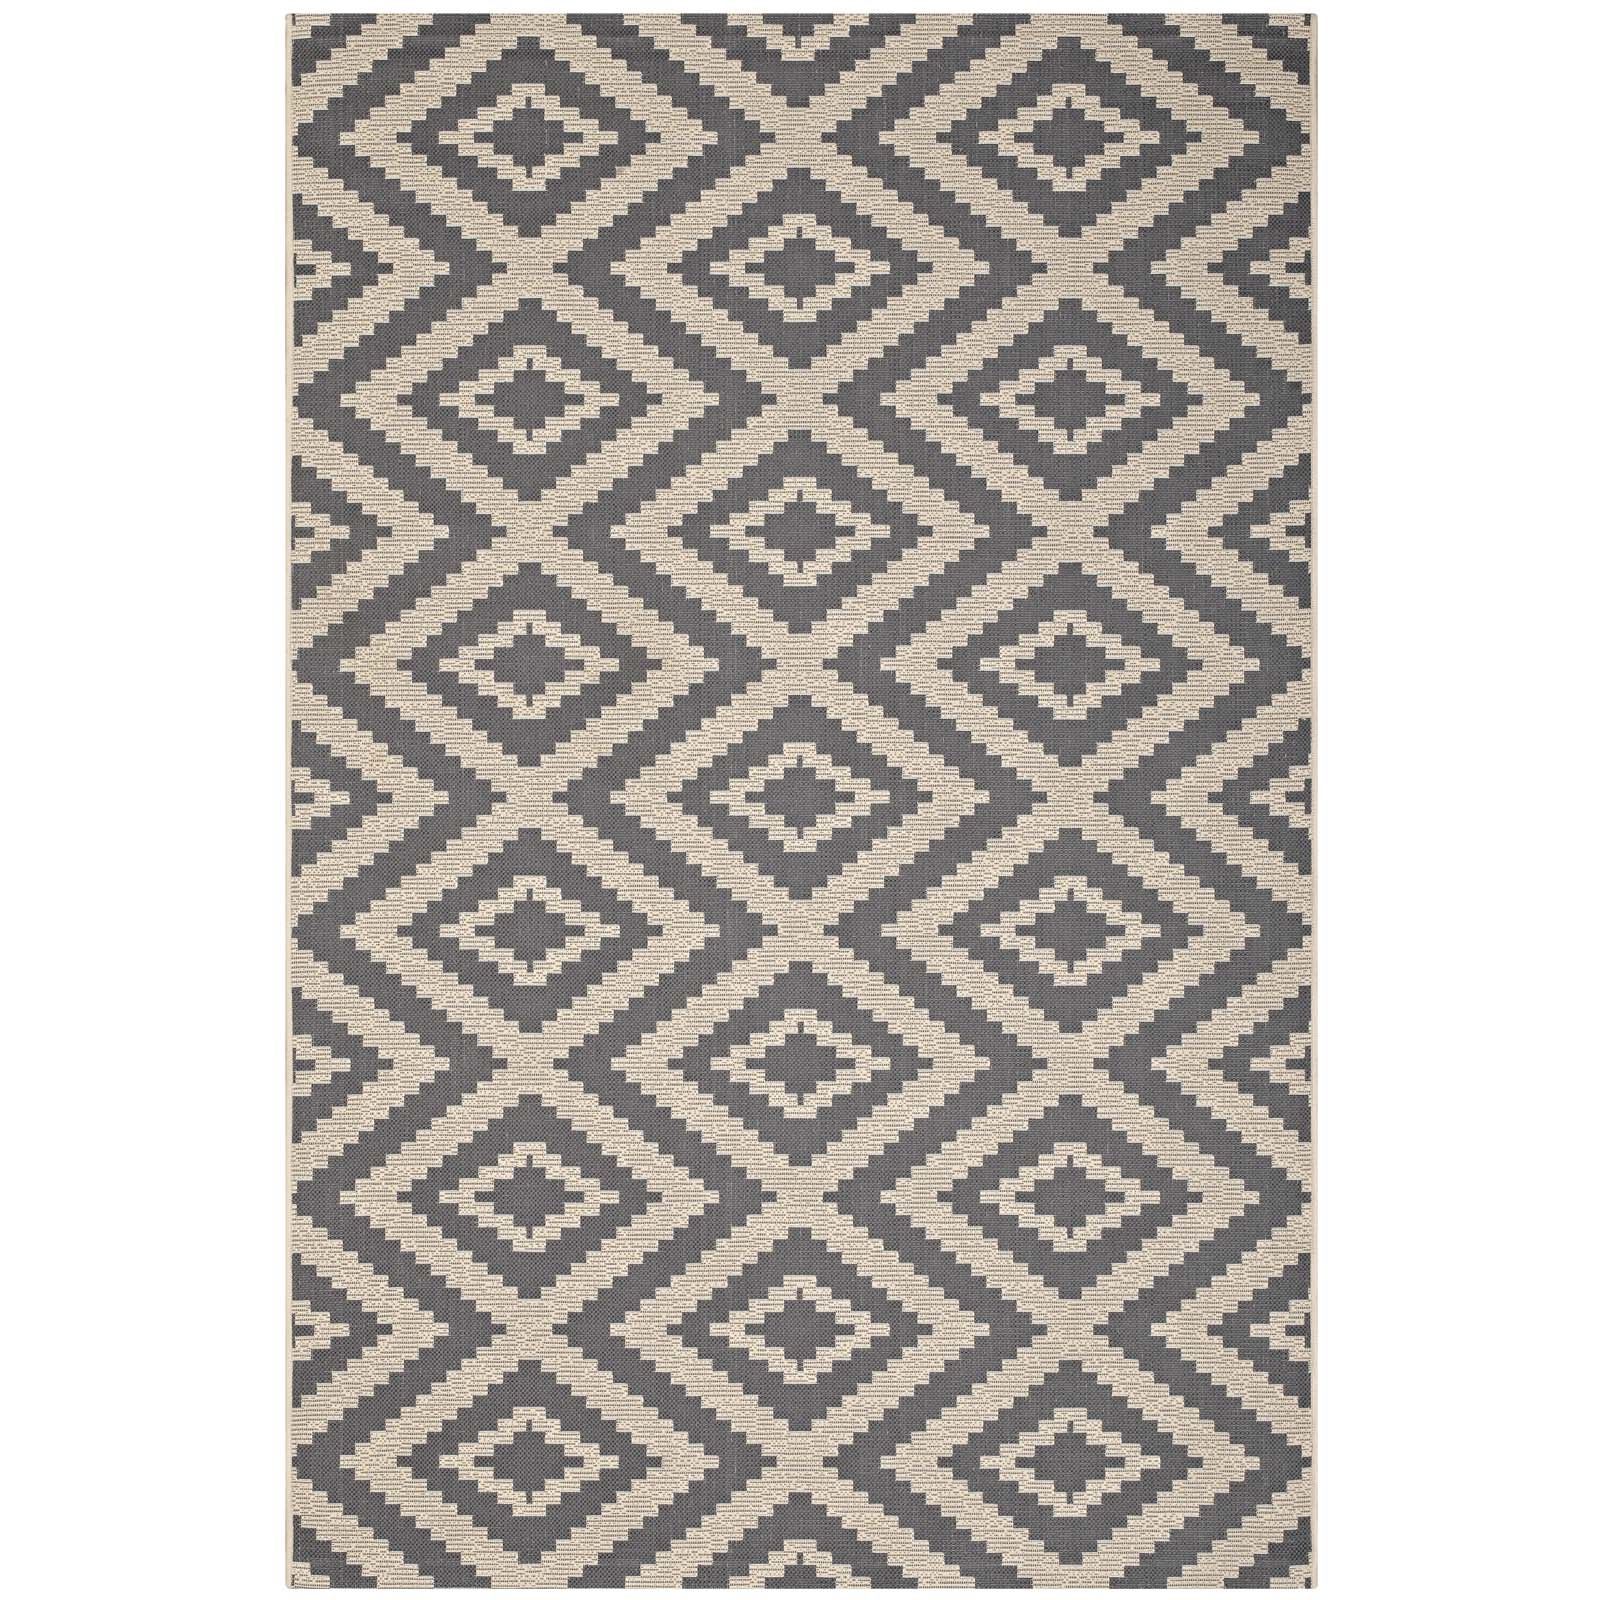 Well Liked Jagged Geometric Diamond Trellis 5x8 Indoor And Outdoor Area Rug In With Regard To Gray And Beige Trellis Cylinder Pouf Ottomans (View 10 of 10)